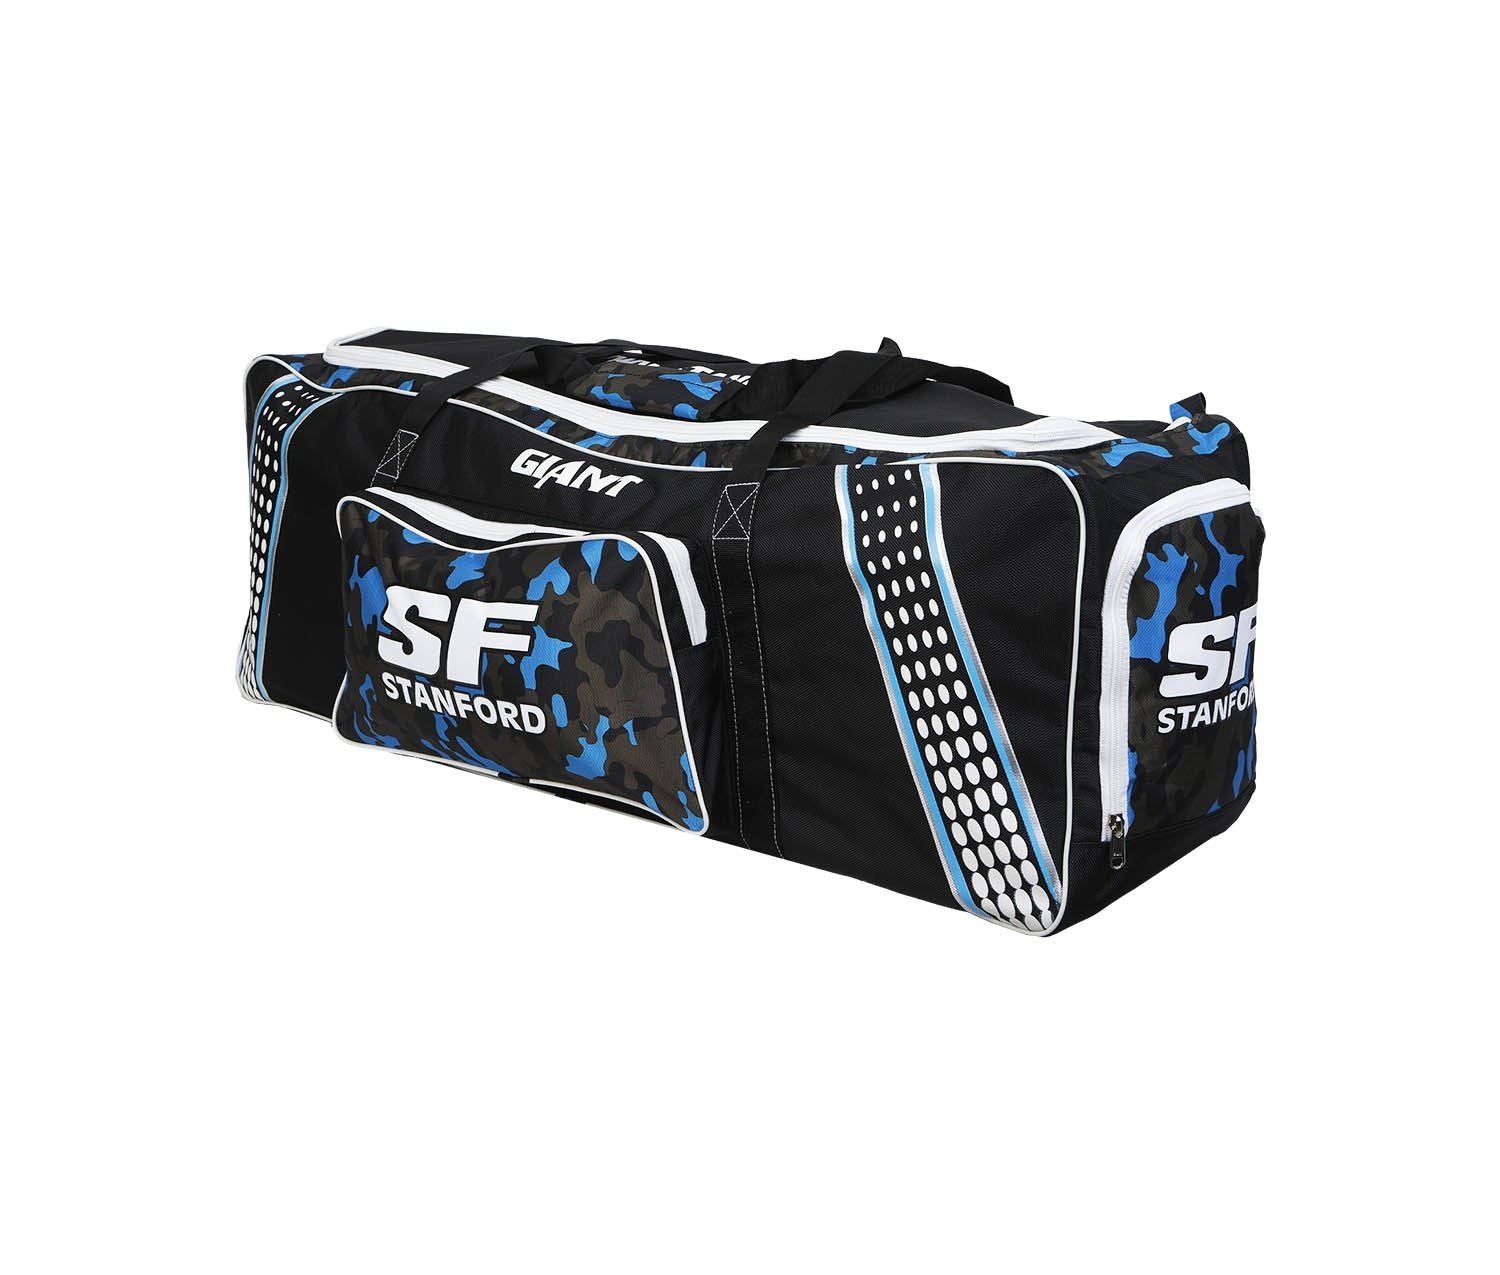 SS Glory Cricket Kit Bag With Wheels  Multi color